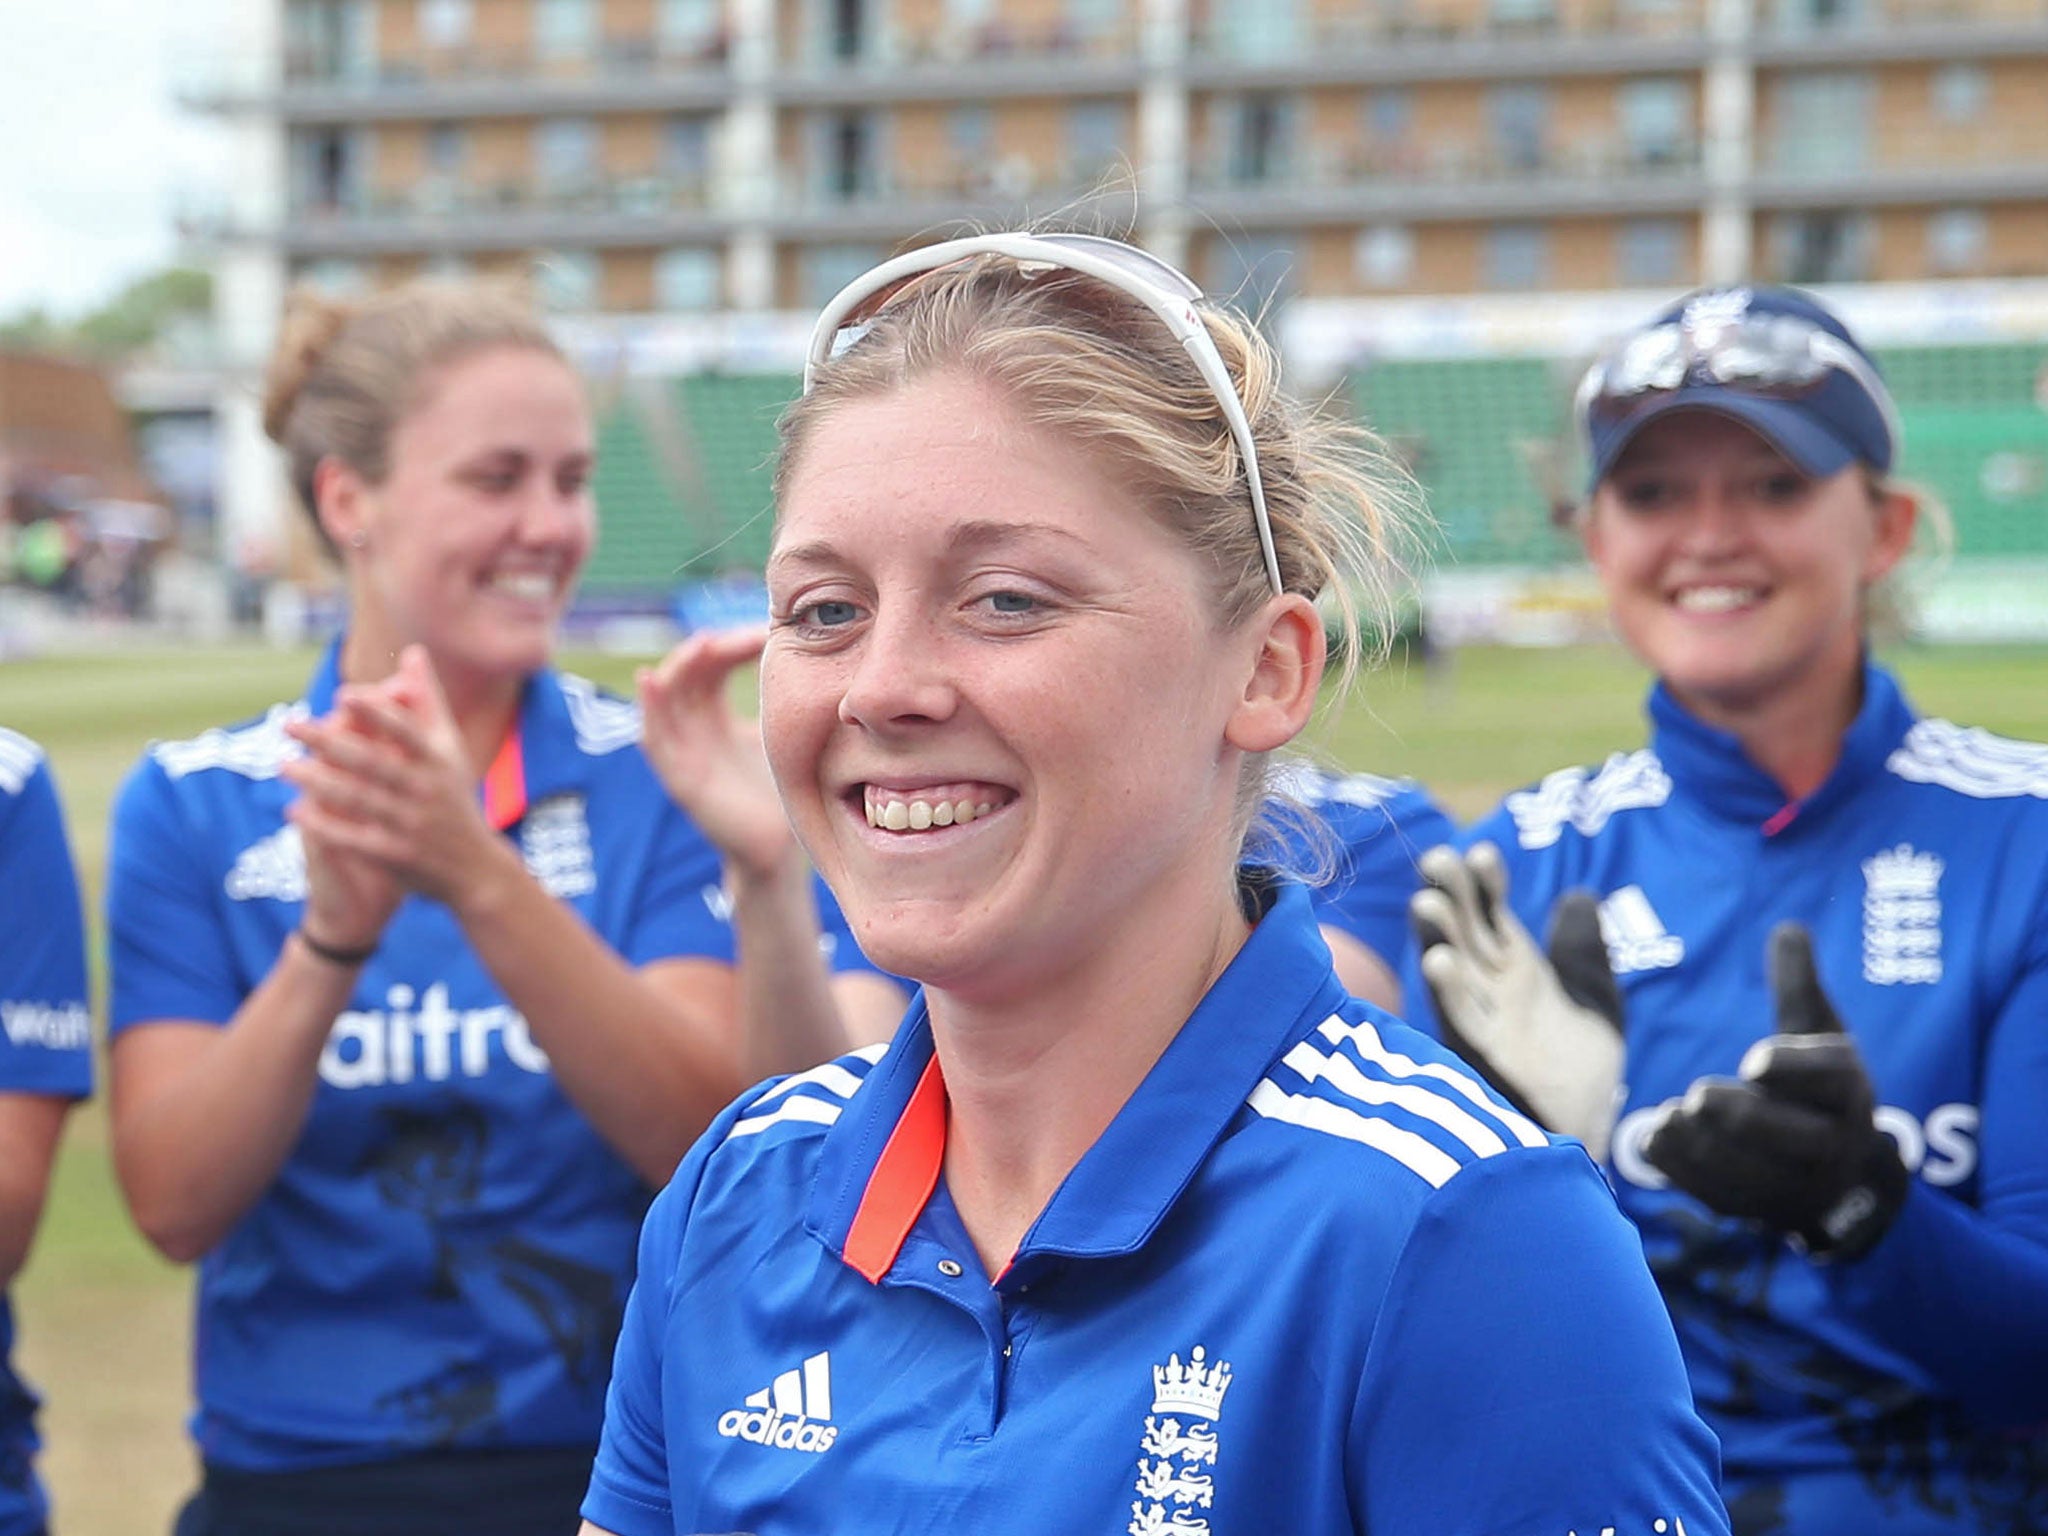 Heather Knight refuses to acknowledge her standing as England’s likeliest next captain